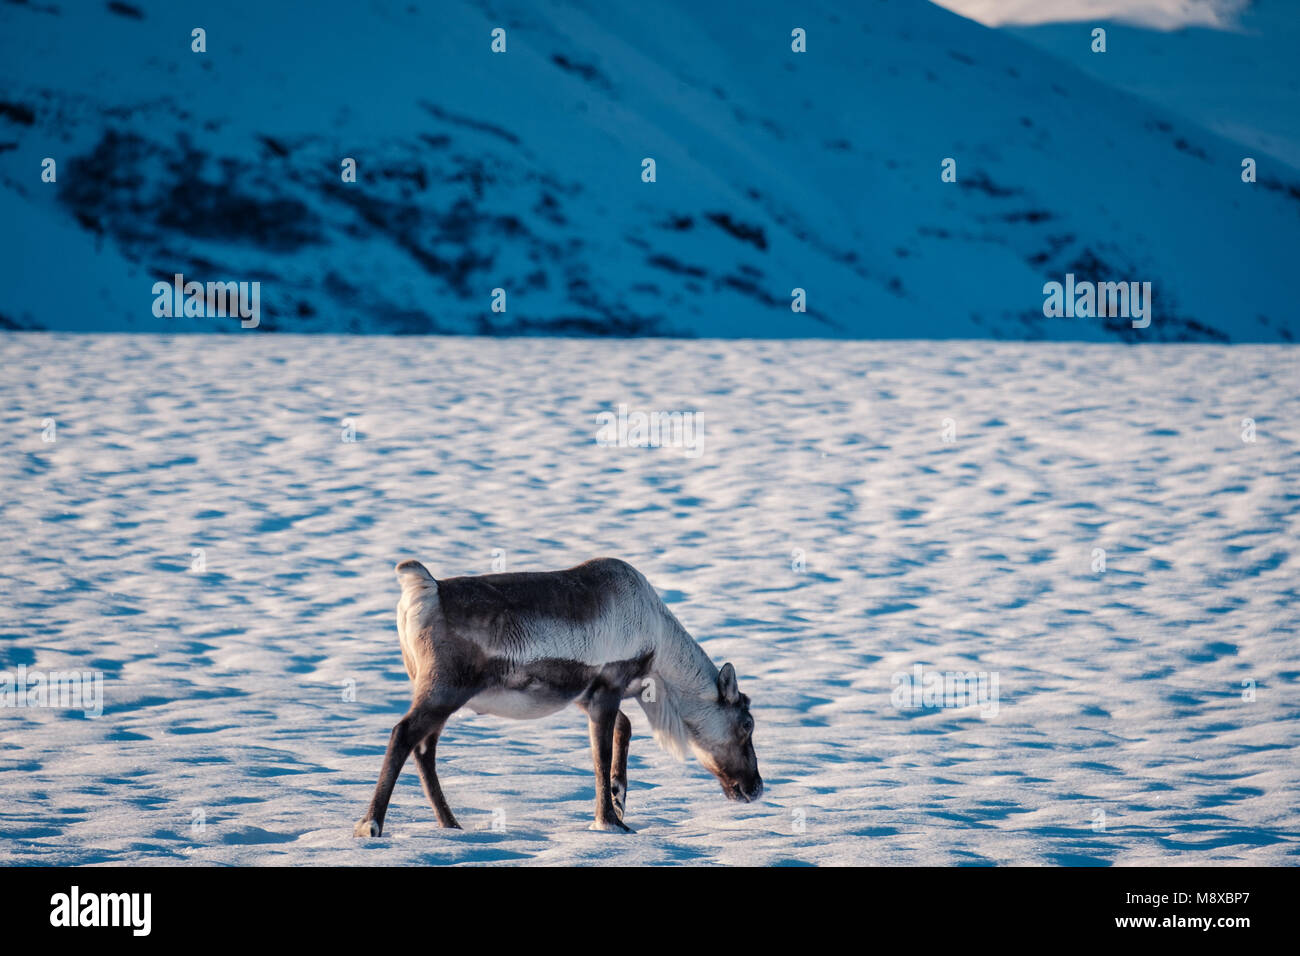 Icelandic reindeer grazing near the Glacier Lagoon in south east Iceland in its natural winter environment. Stock Photo